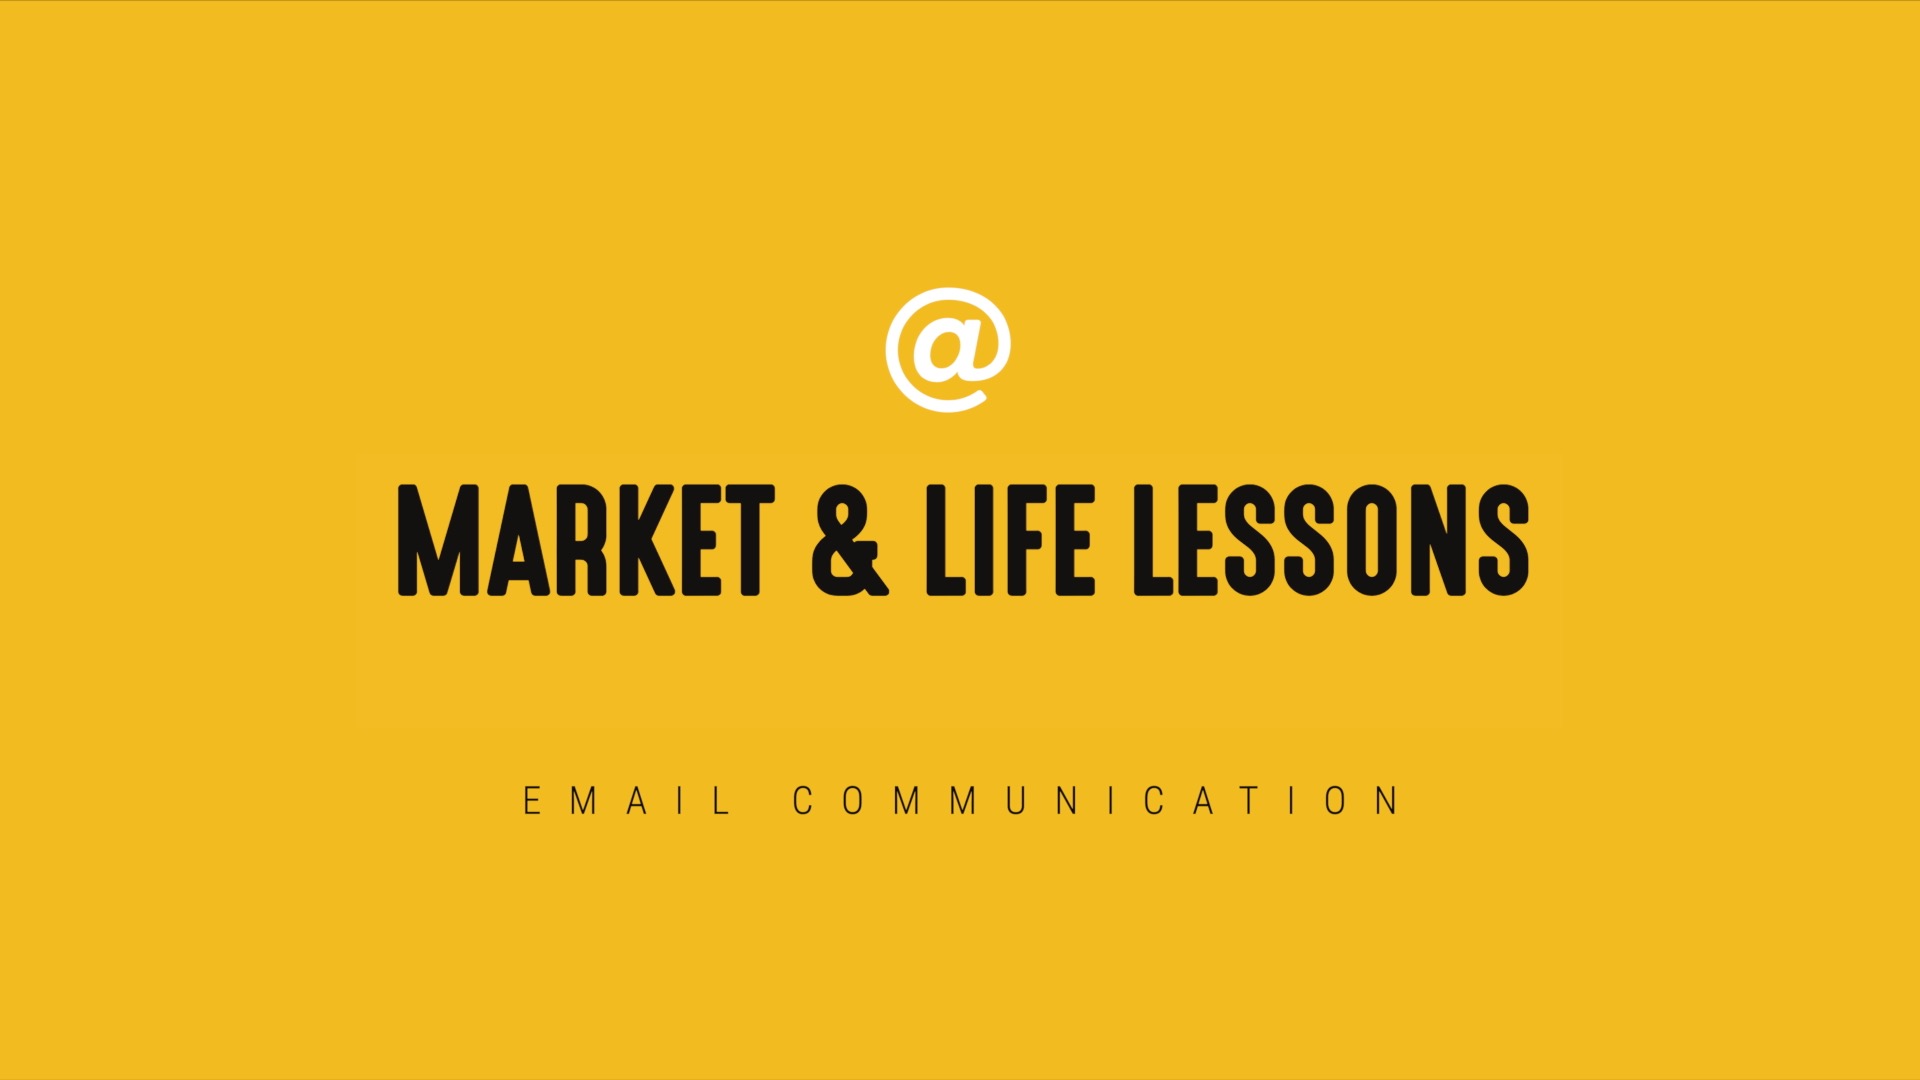 [NEW] Market & Life Lessons - Timely Email